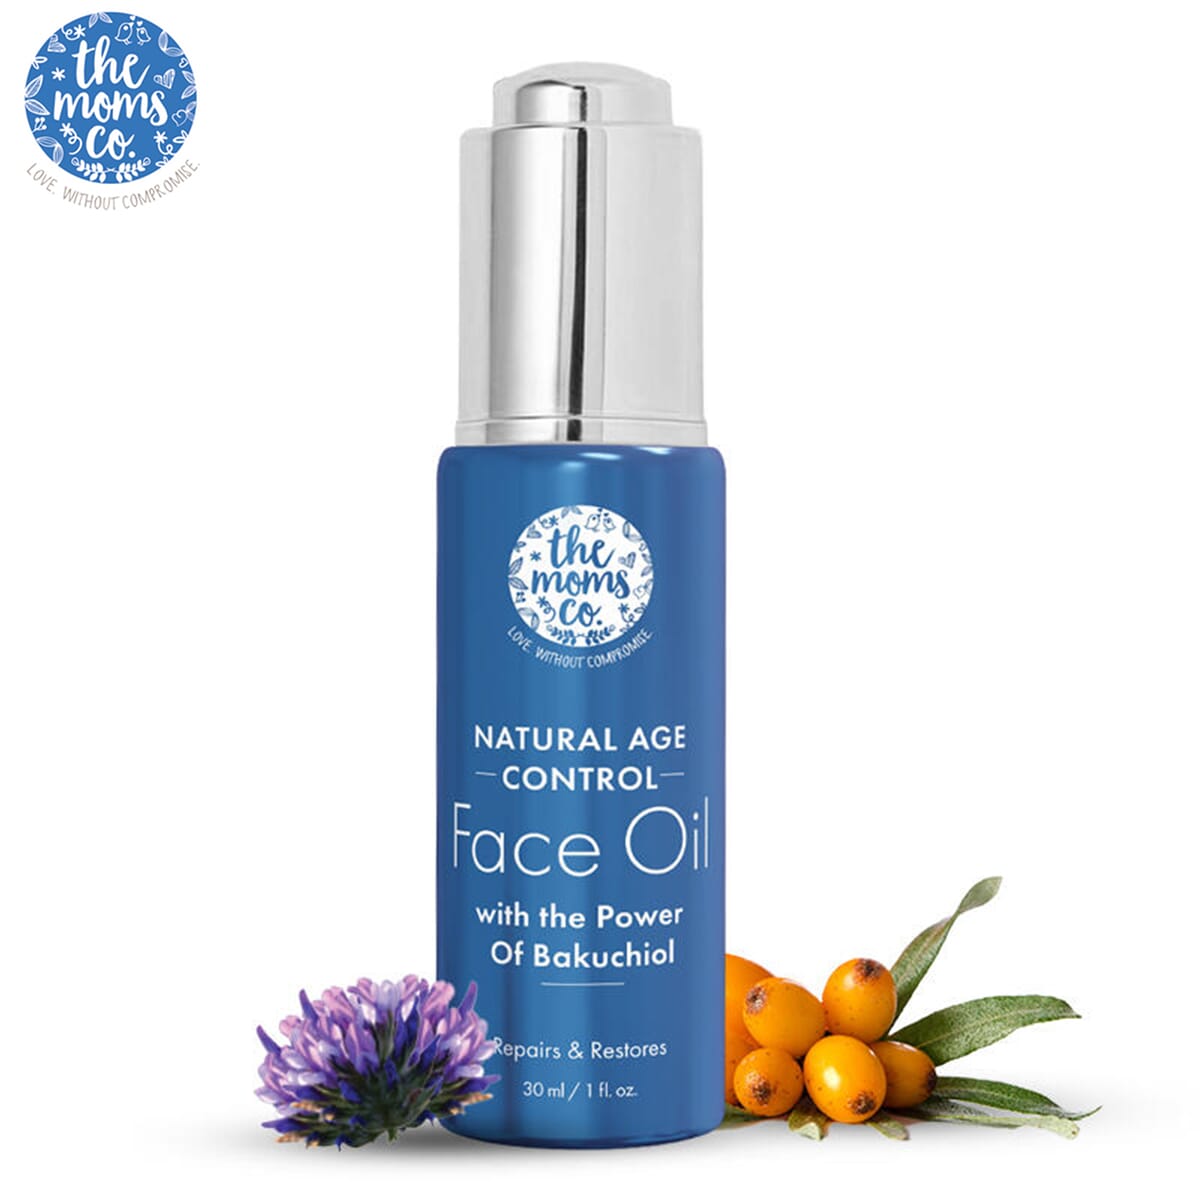 Natural Age Control Face Oil